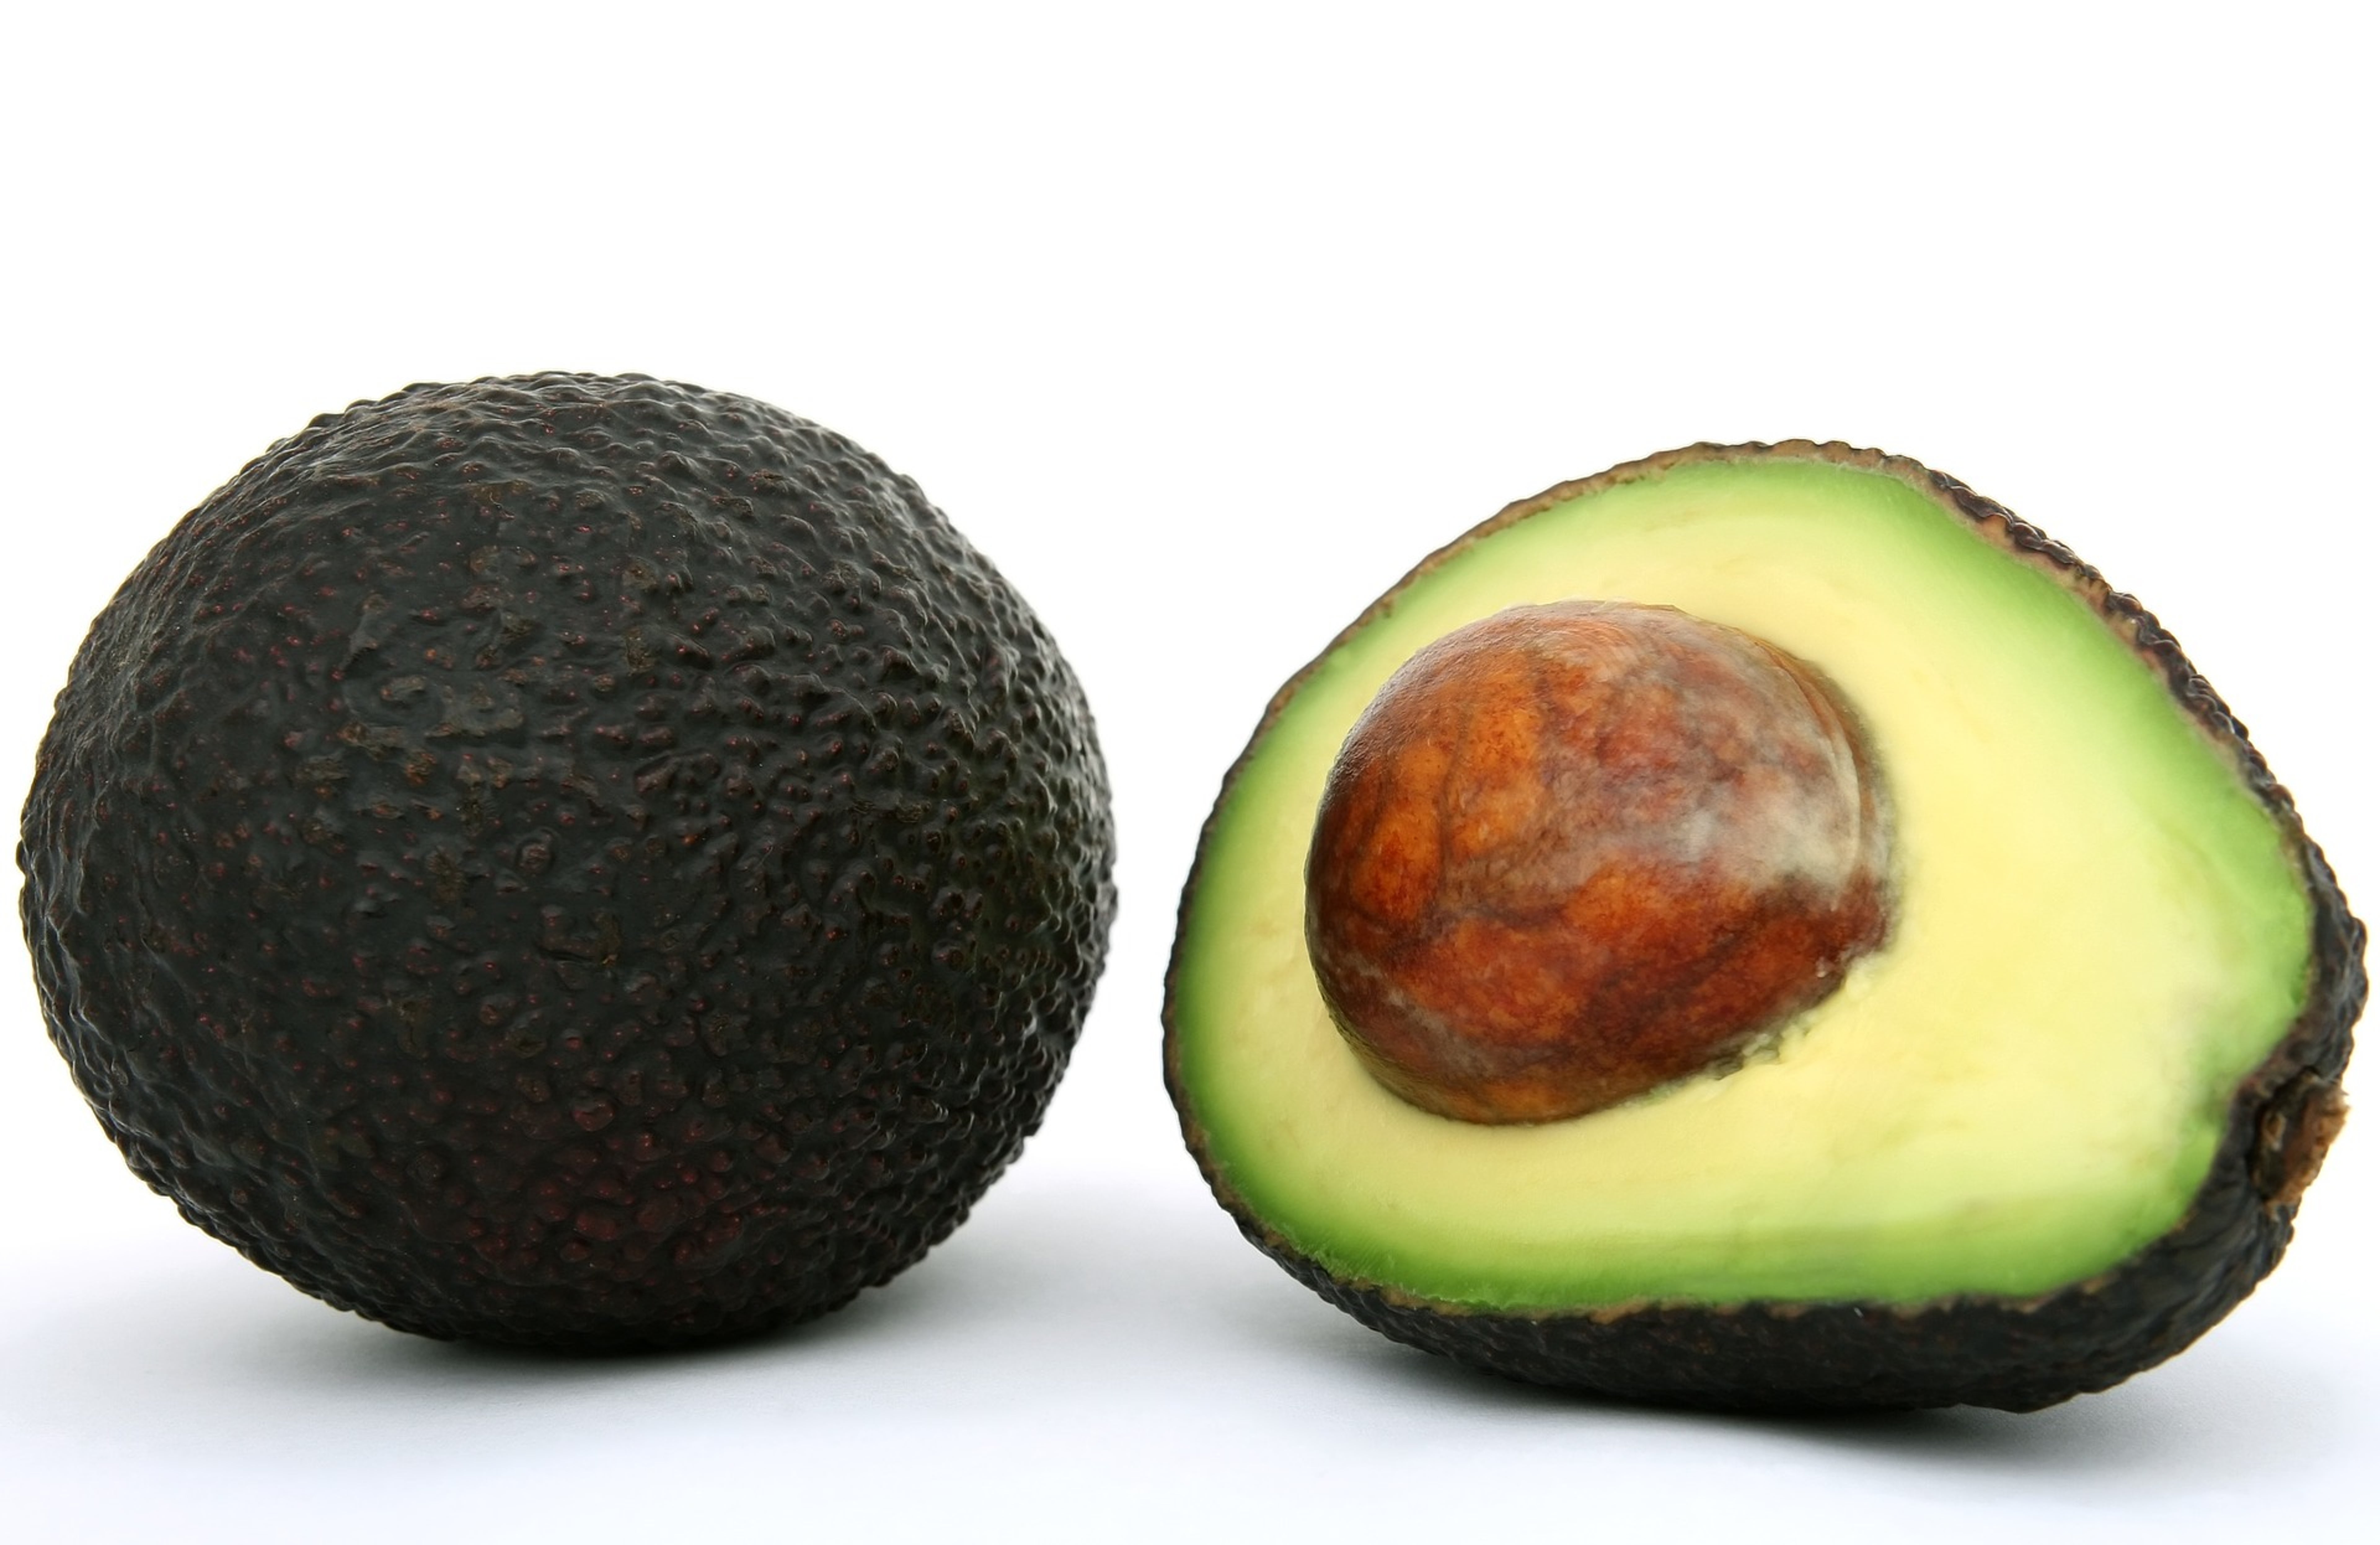 Mission Produce IPO: What Investors Should Know About The Avocado Distributor